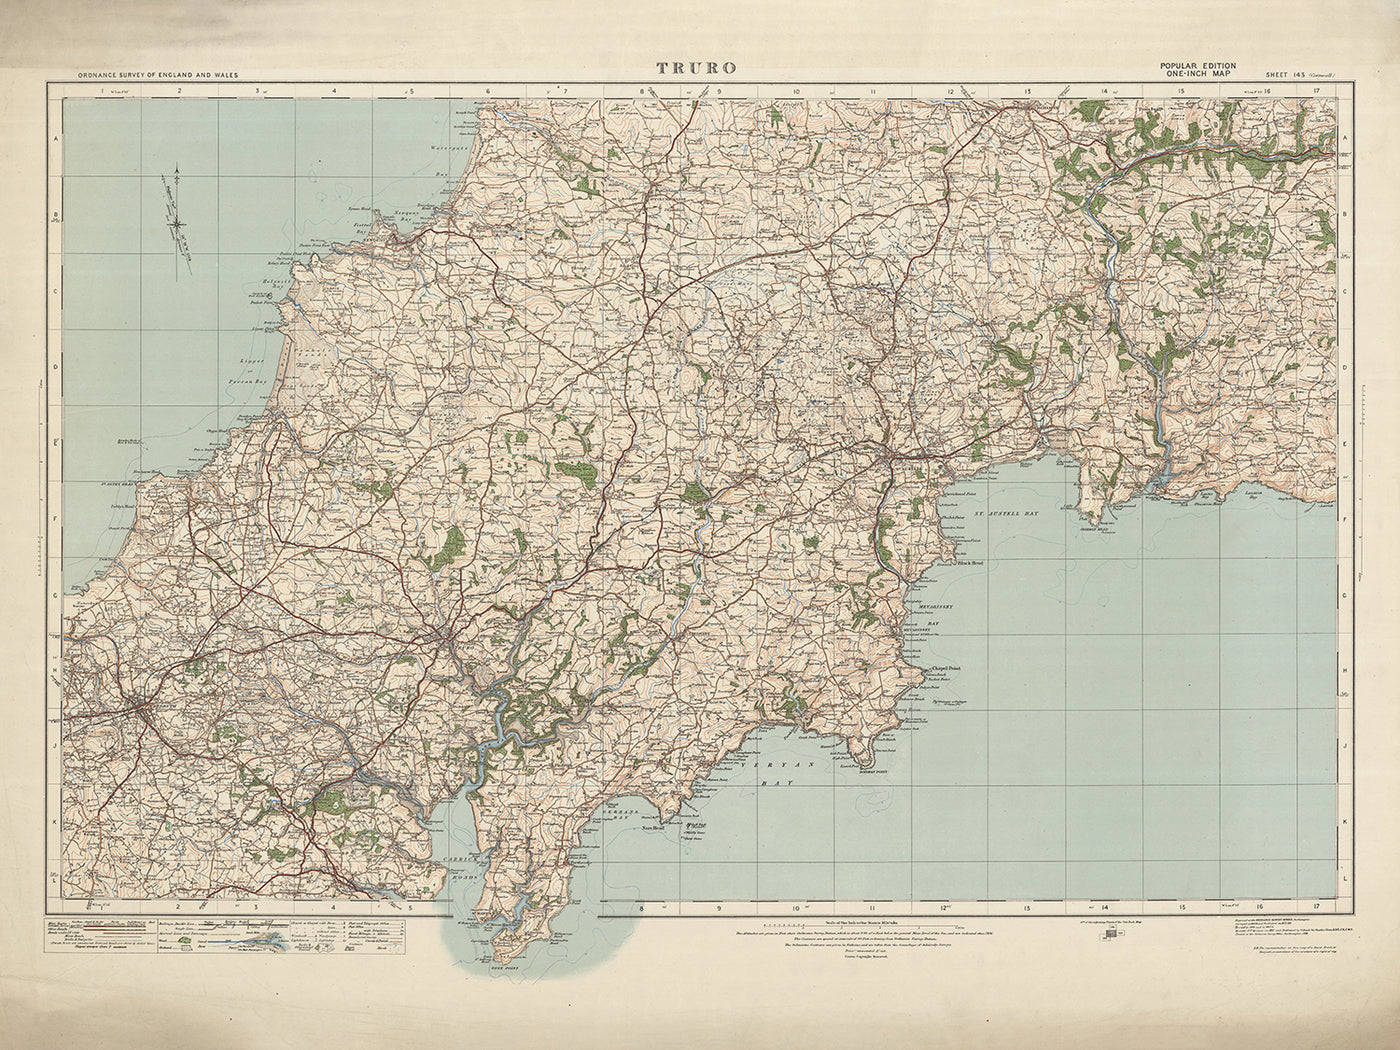 Old Ordnance Survey Map, Sheet 143 - Truro, 1919-1926: Newquay, St Austell, Roche, Bodmin, River Fal, Carn Brea Hill, and Goss Moor